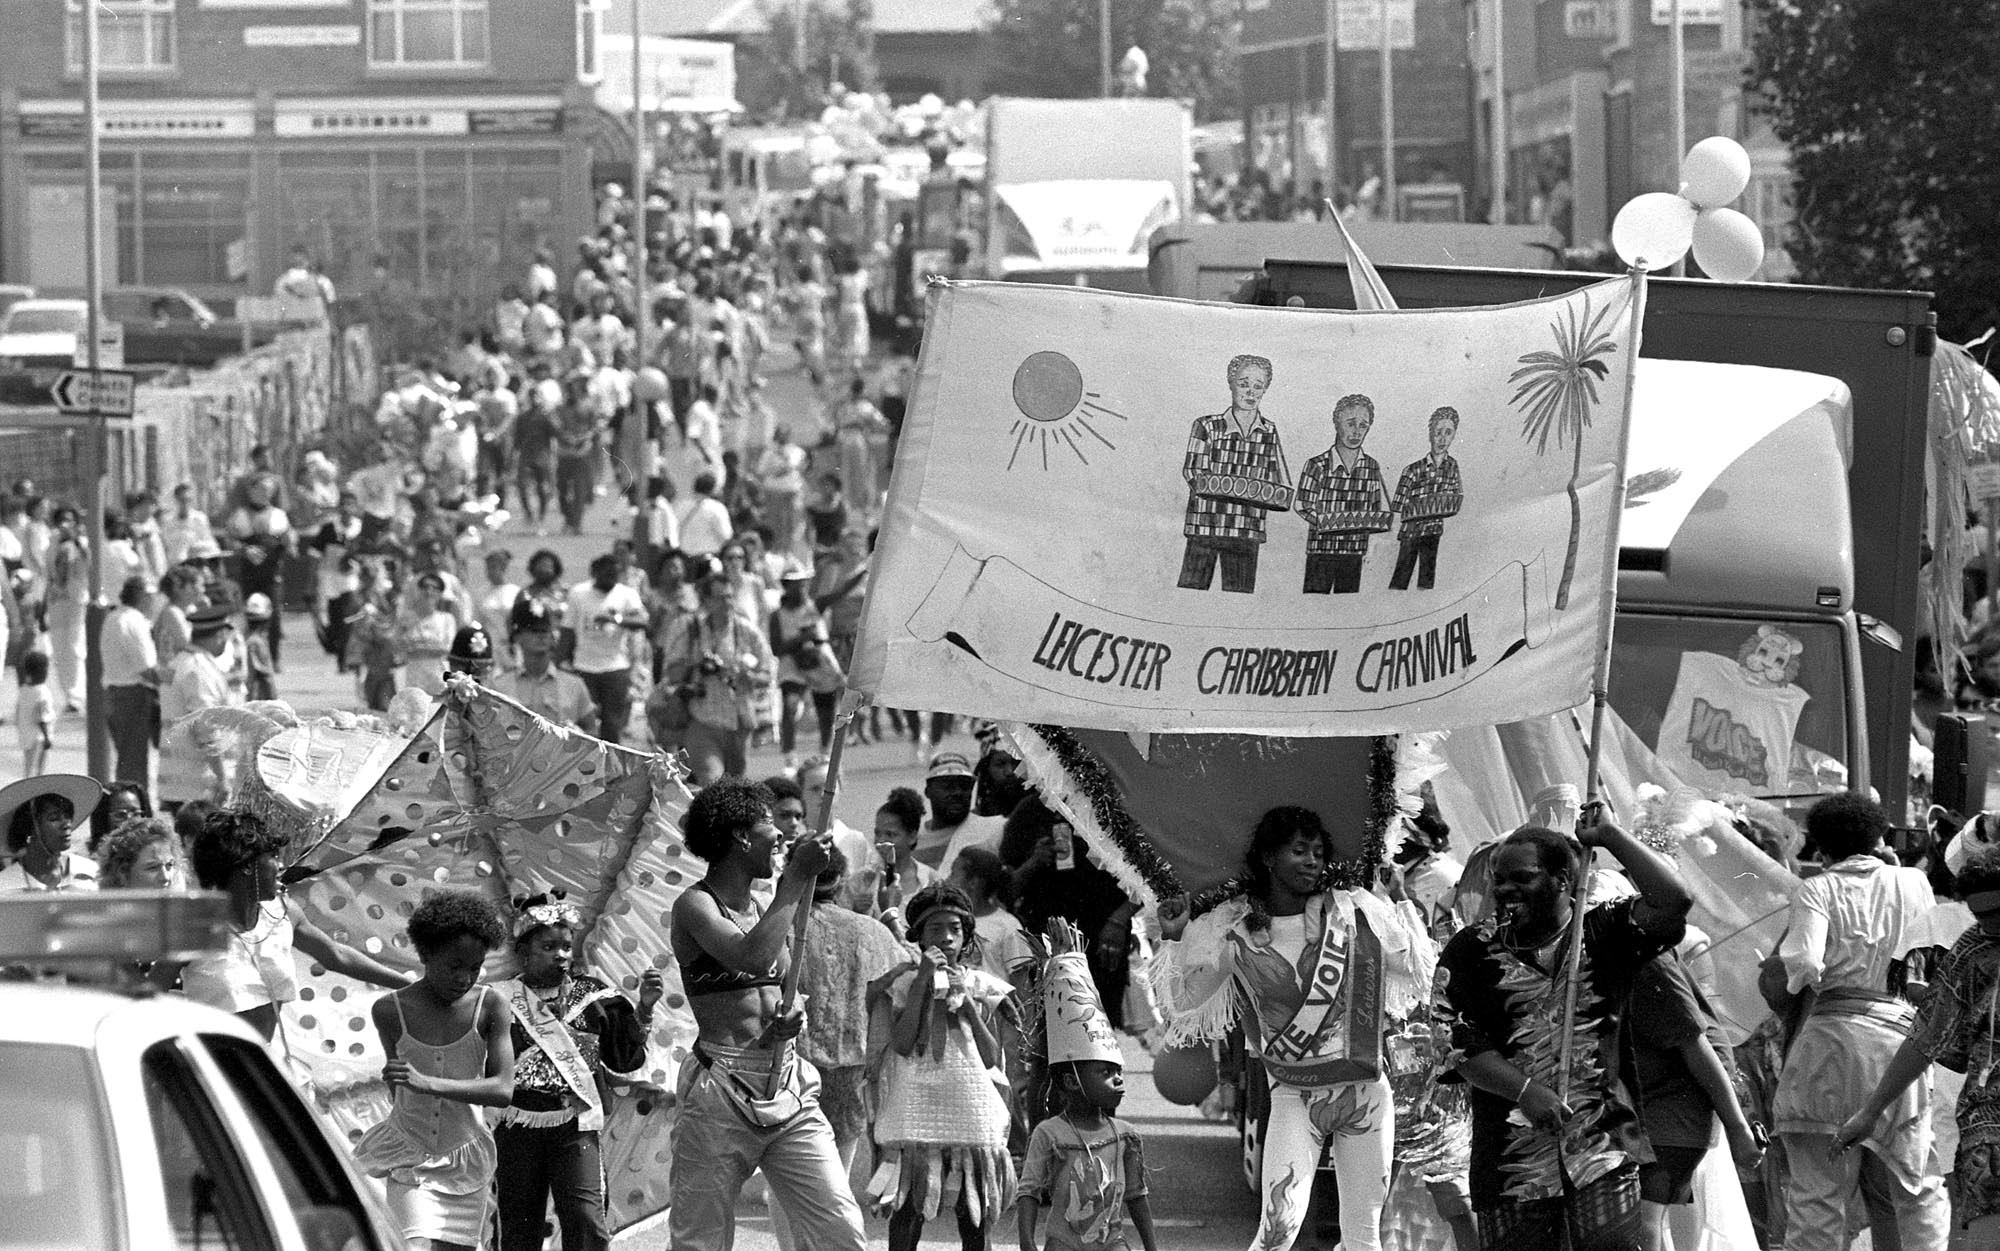 The Carnival parade makes its way along Sparkenhoe Street in front of large crowds, 1990 -